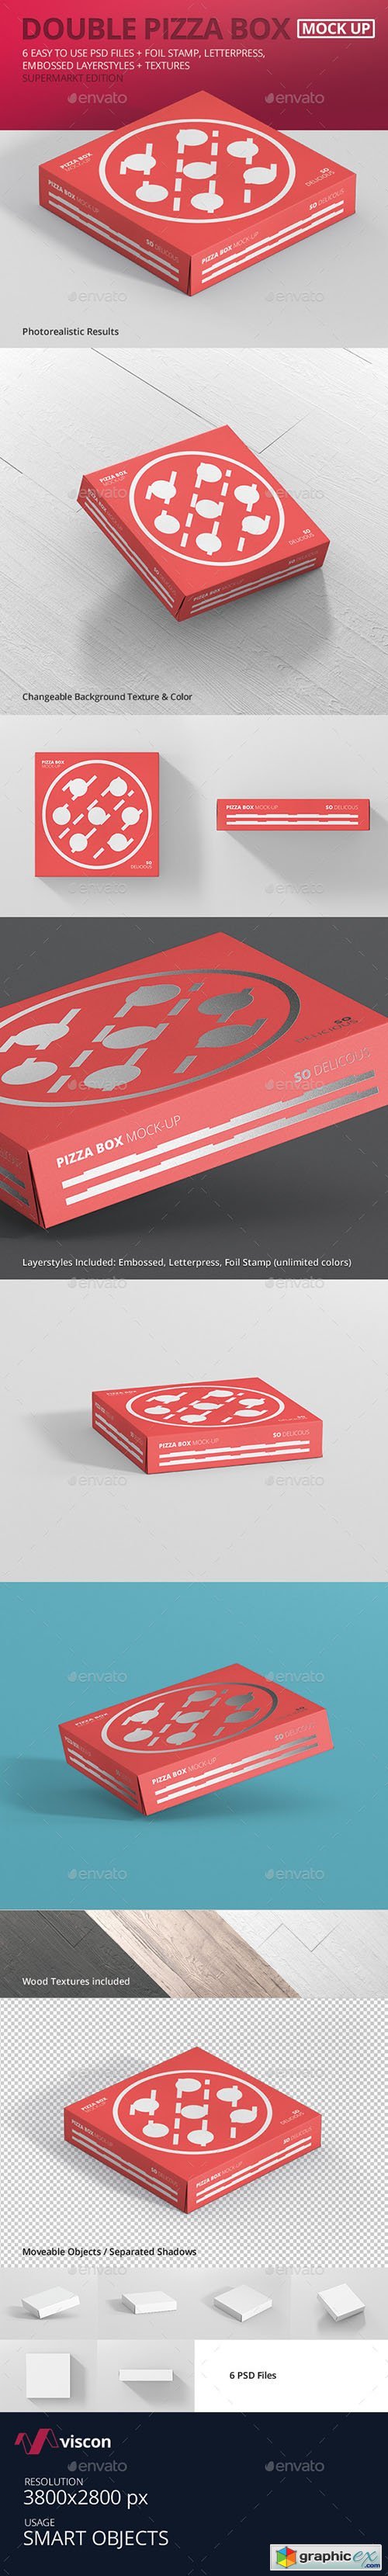 Pizza Box Mockup - Double Pack Supermarket Edition